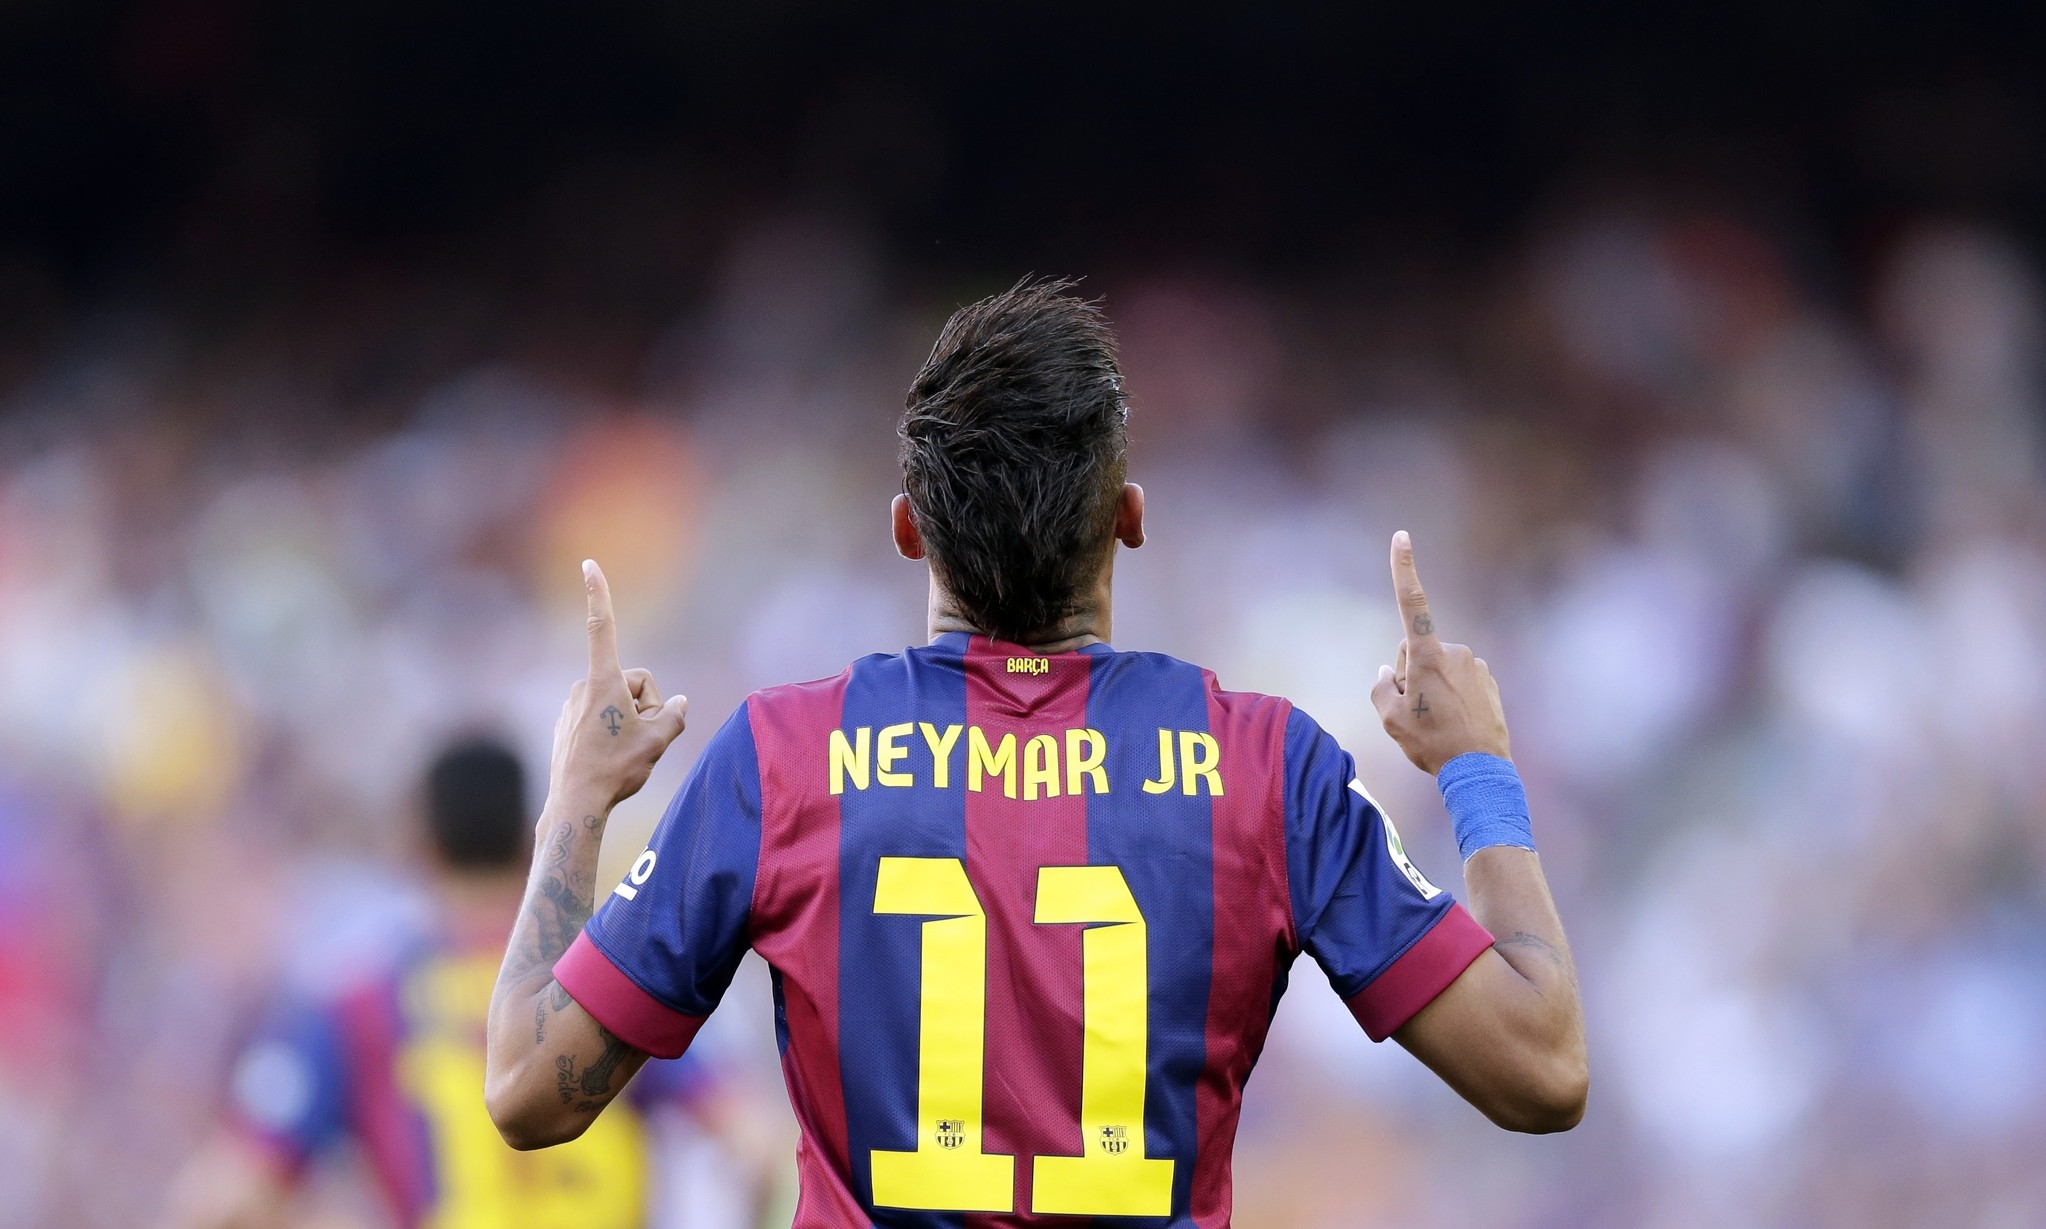 In this May 9, 2015 file photo, FC Barcelona's Neymar celebrates after scoring against Real Sociedad during a Spanish La Liga soccer match at the Camp Nou stadium. (AP Photo)